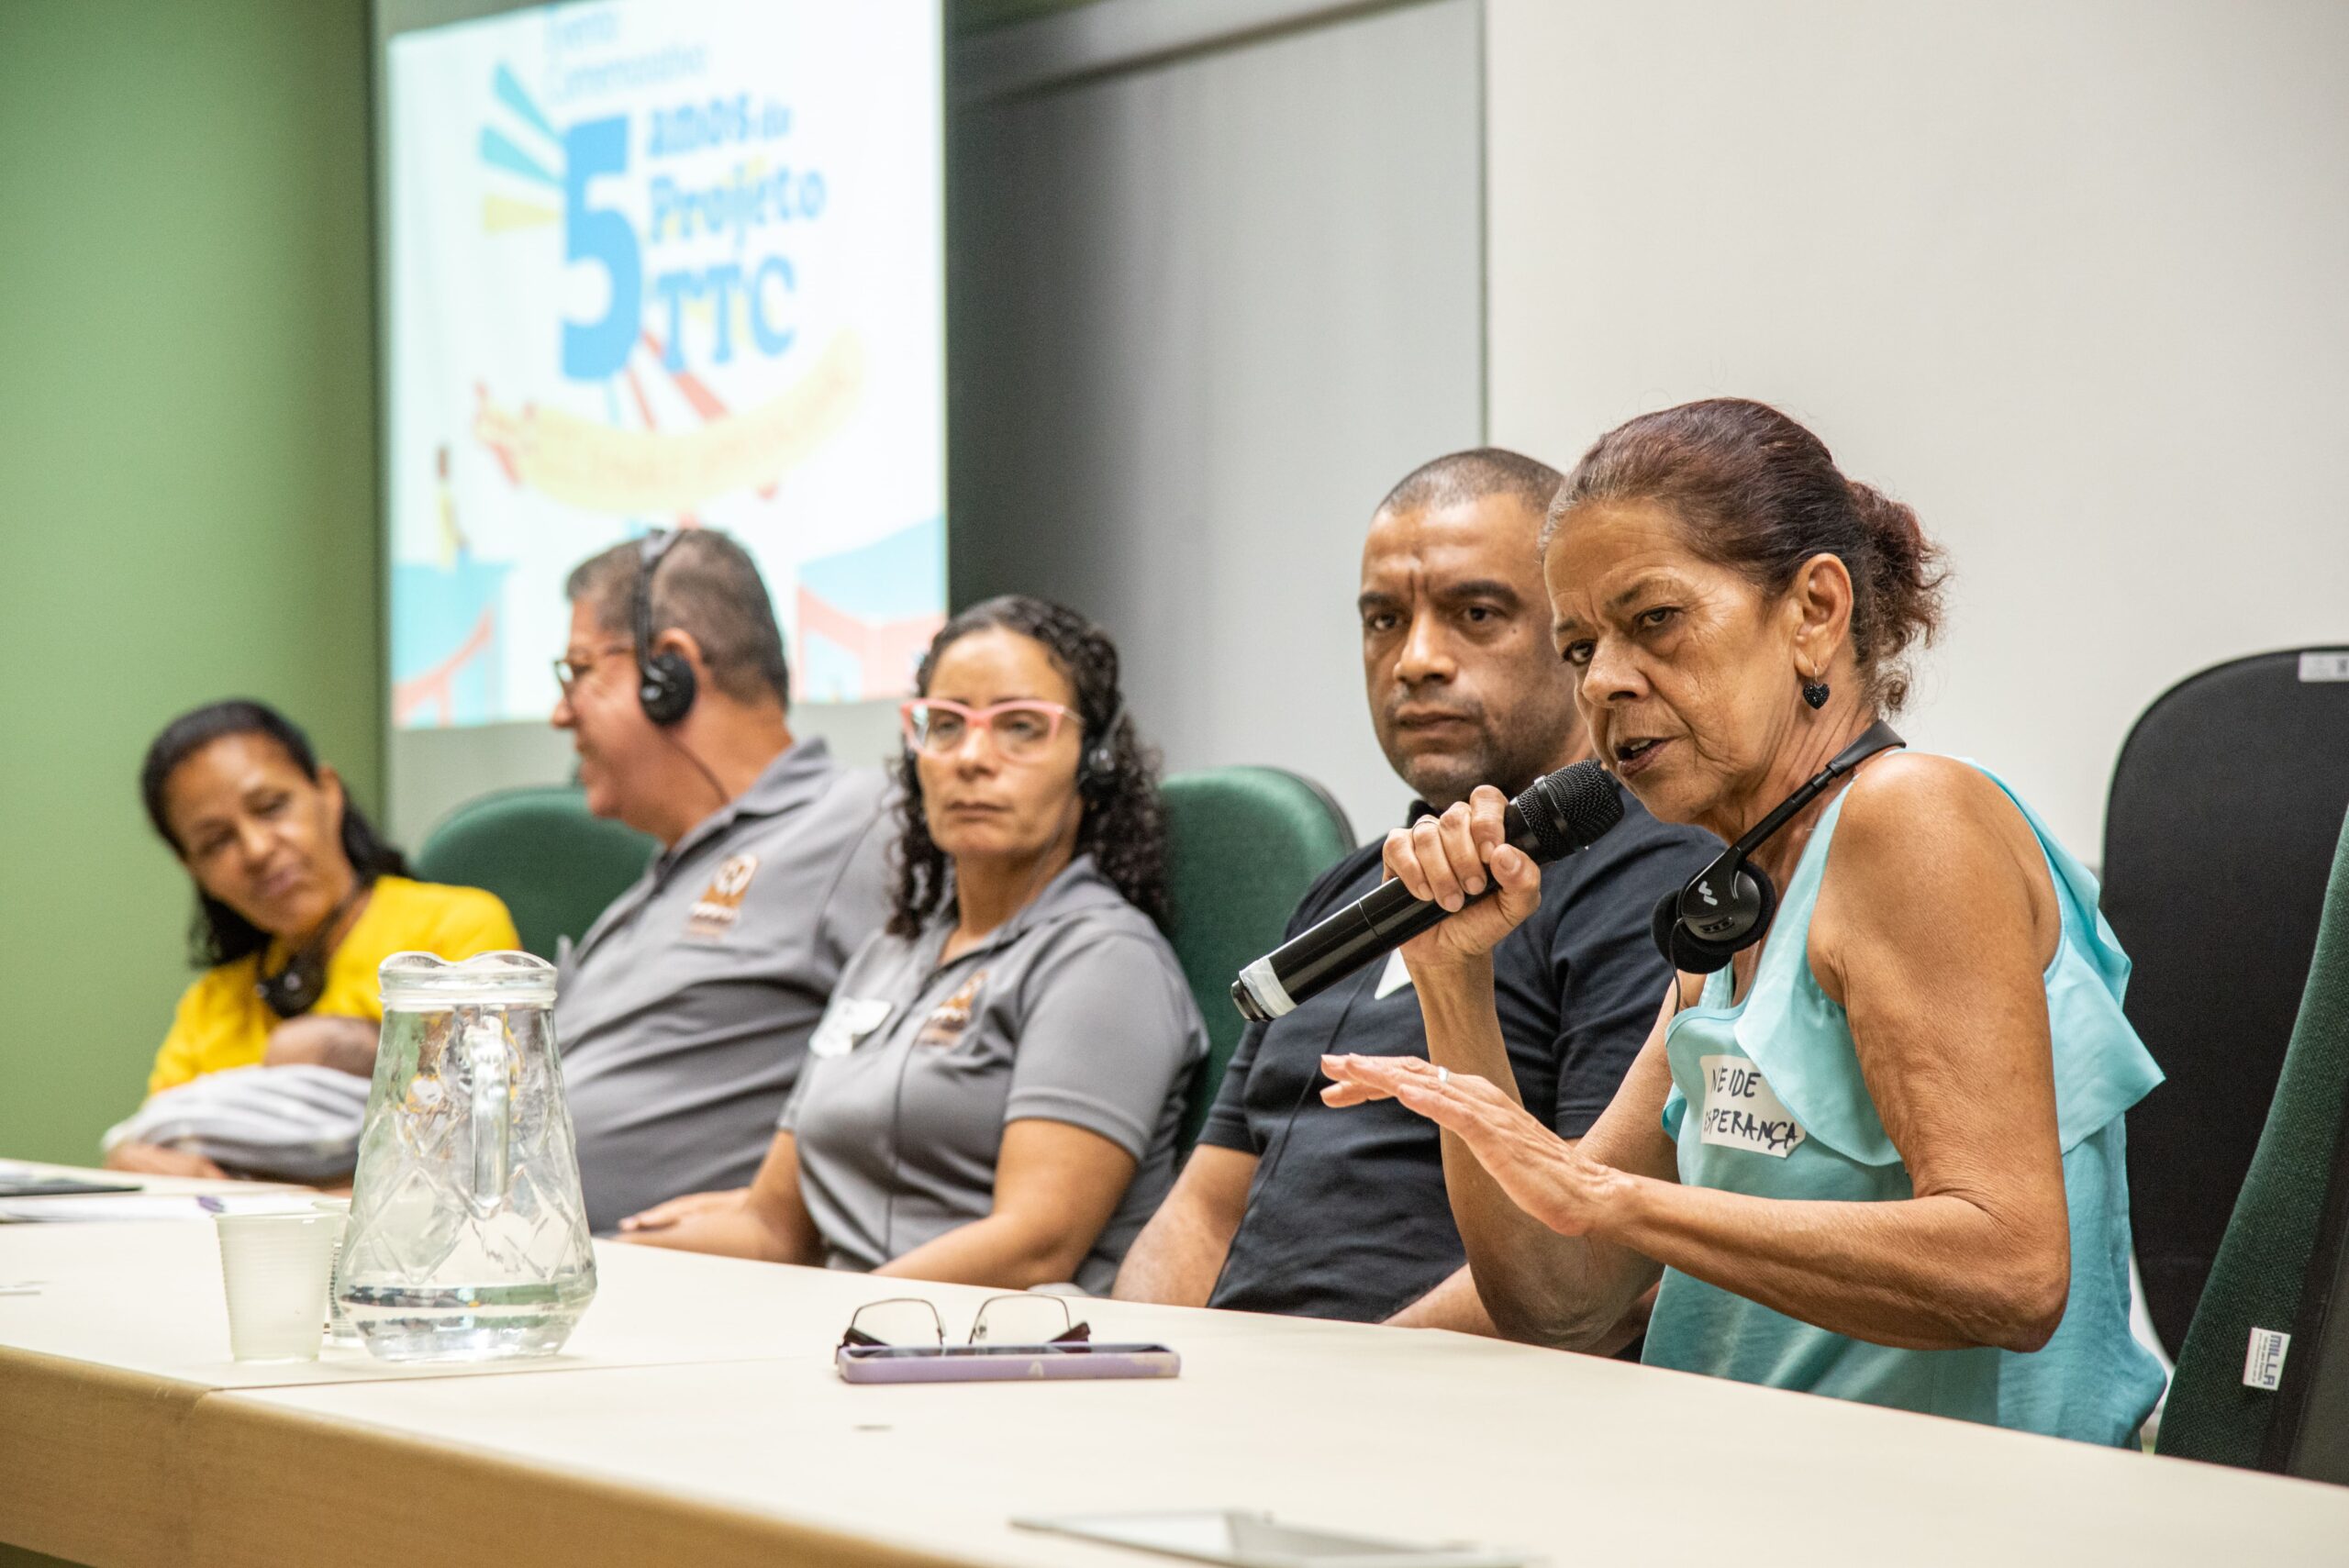 Neide Mattos from Grupo Esperança, talks about the process of building the community's 70 houses and the importance of the TTC in regularizing the area. Photo: Bárbara Dias